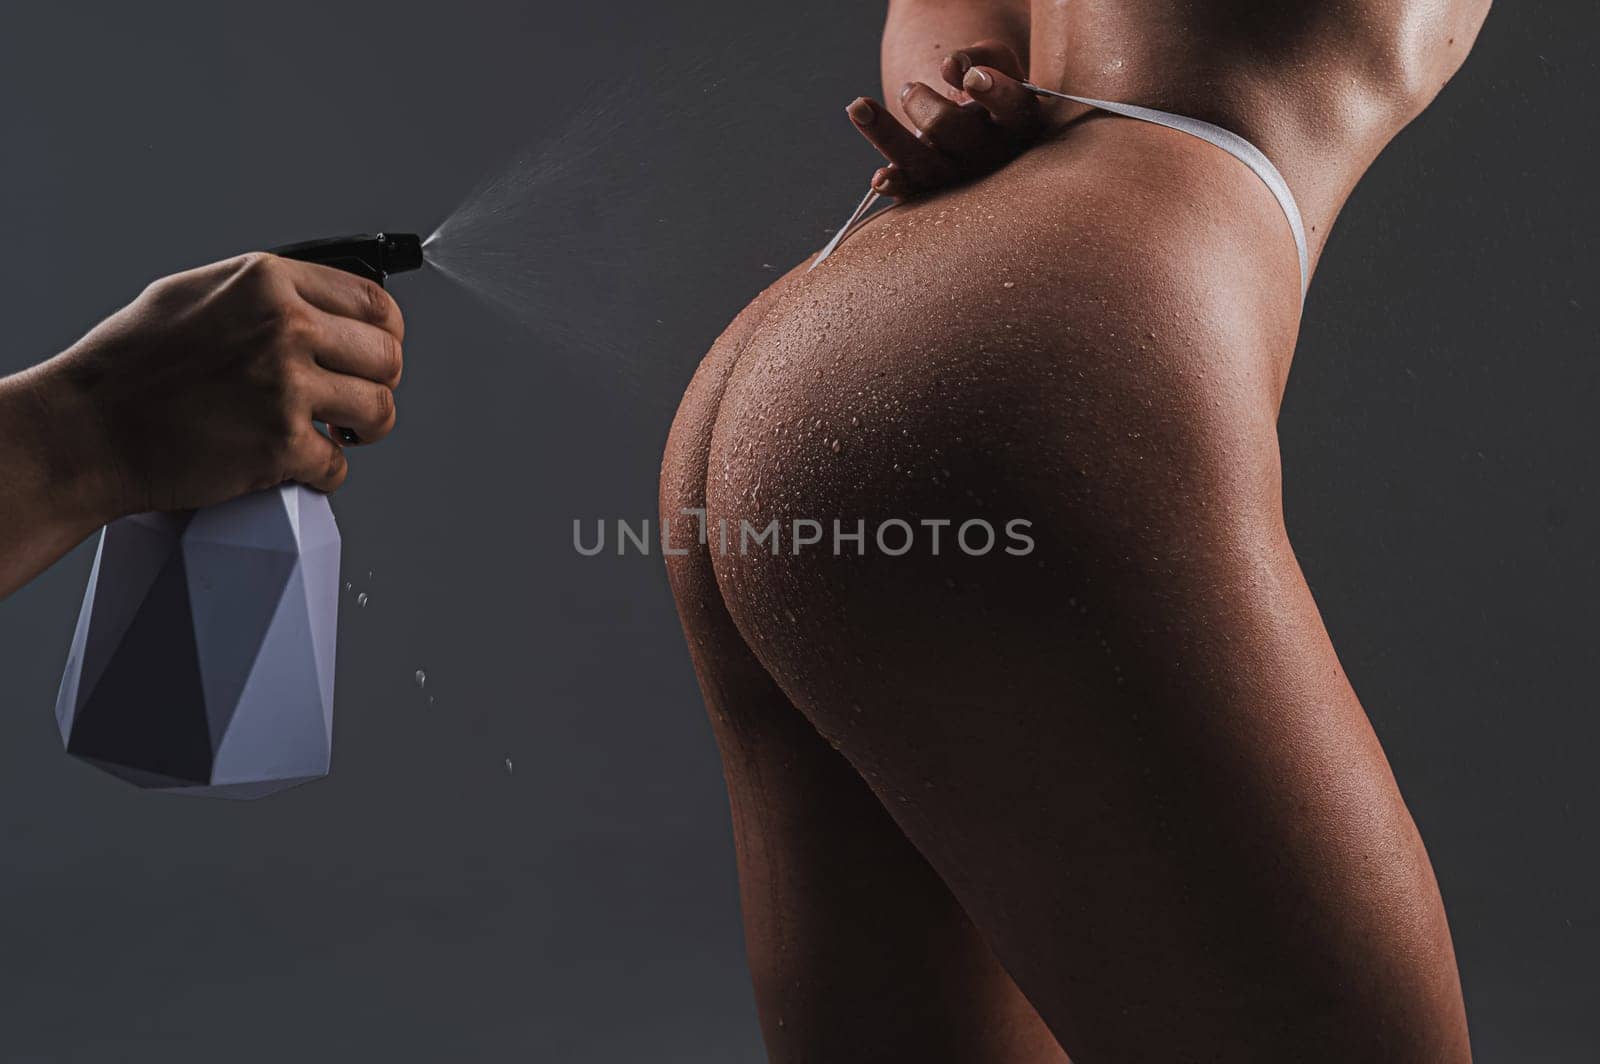 A faceless man sprays water from a polyerizer onto a woman's buttocks. by mrwed54